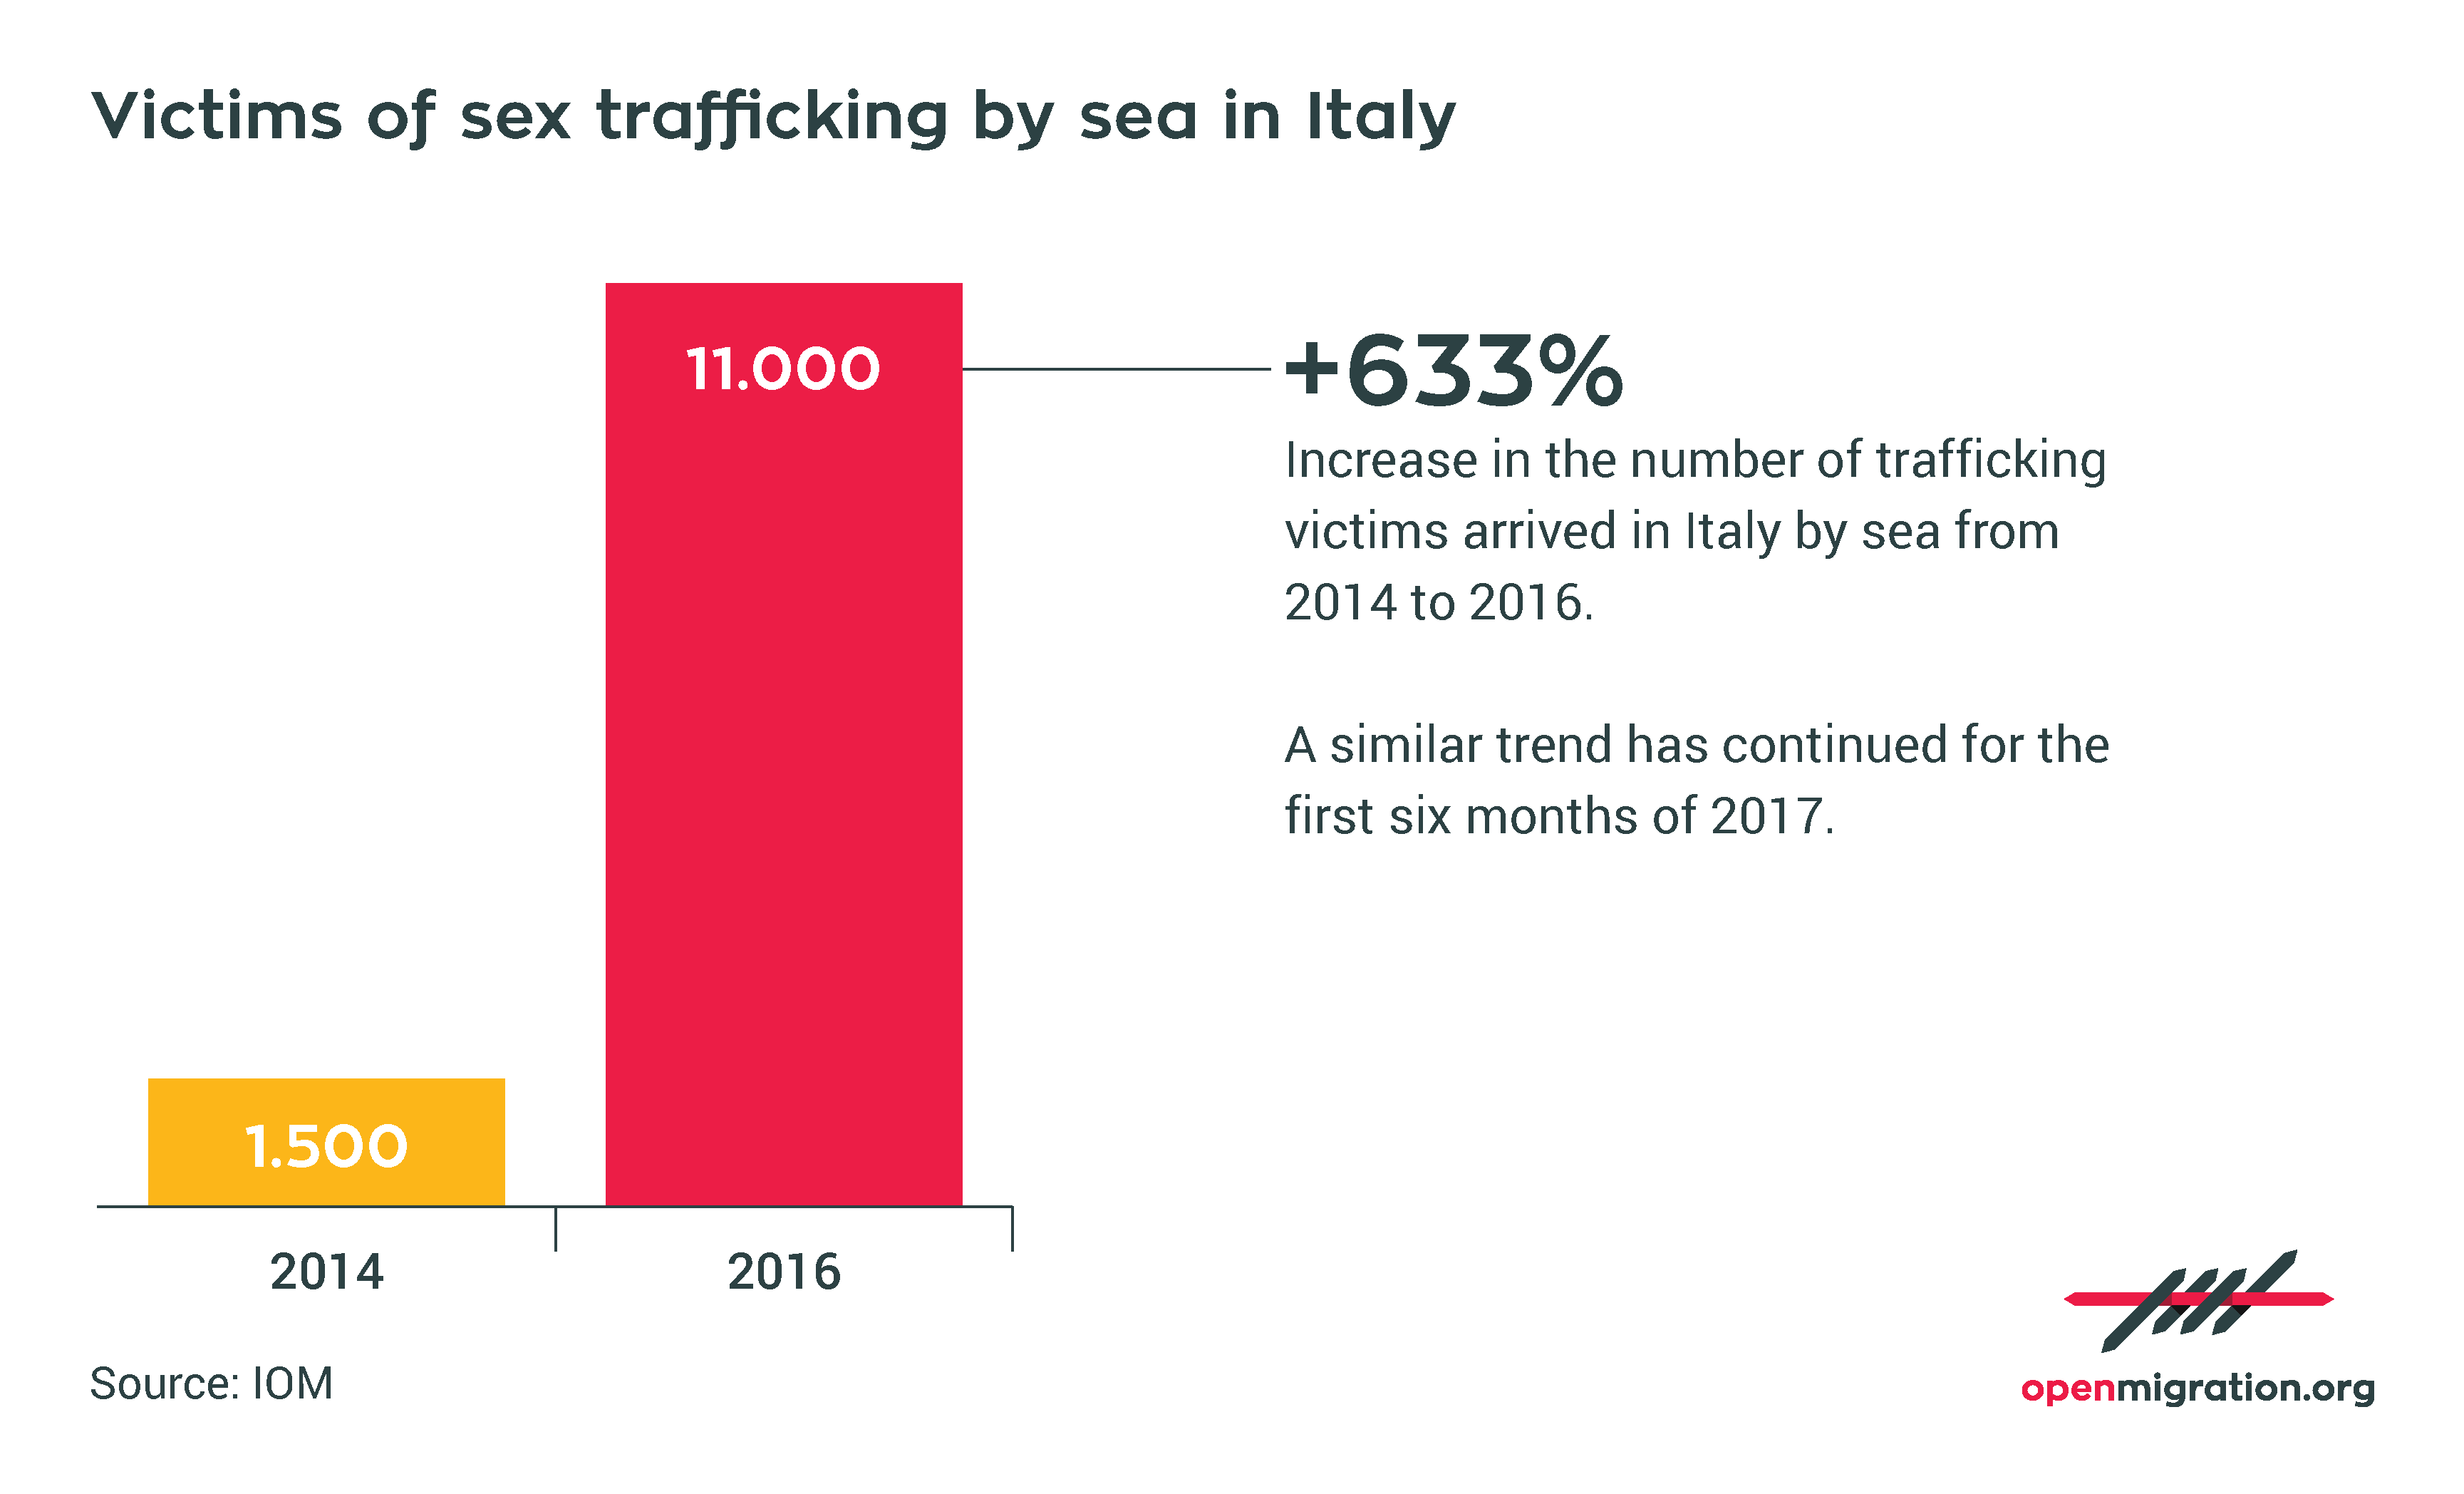 Victims of sex trafficking arriving in Italy, 2014-2016